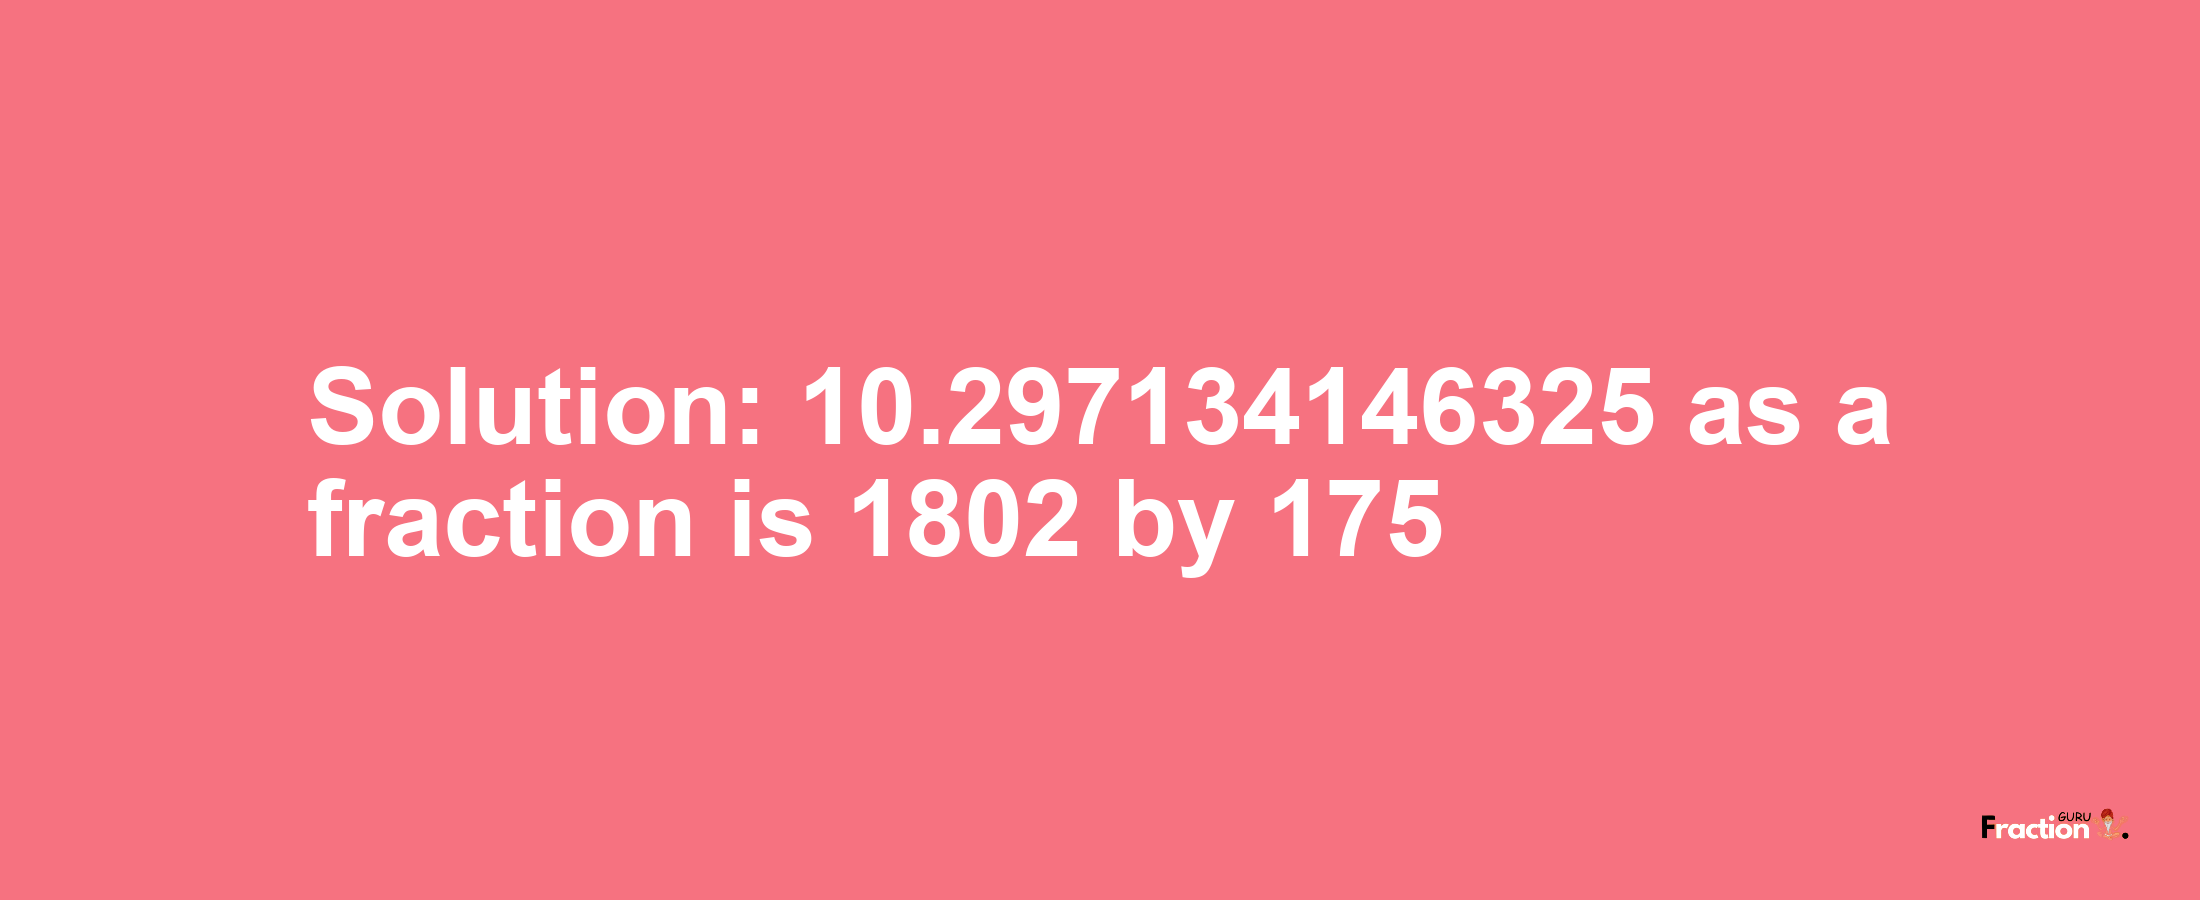 Solution:10.297134146325 as a fraction is 1802/175